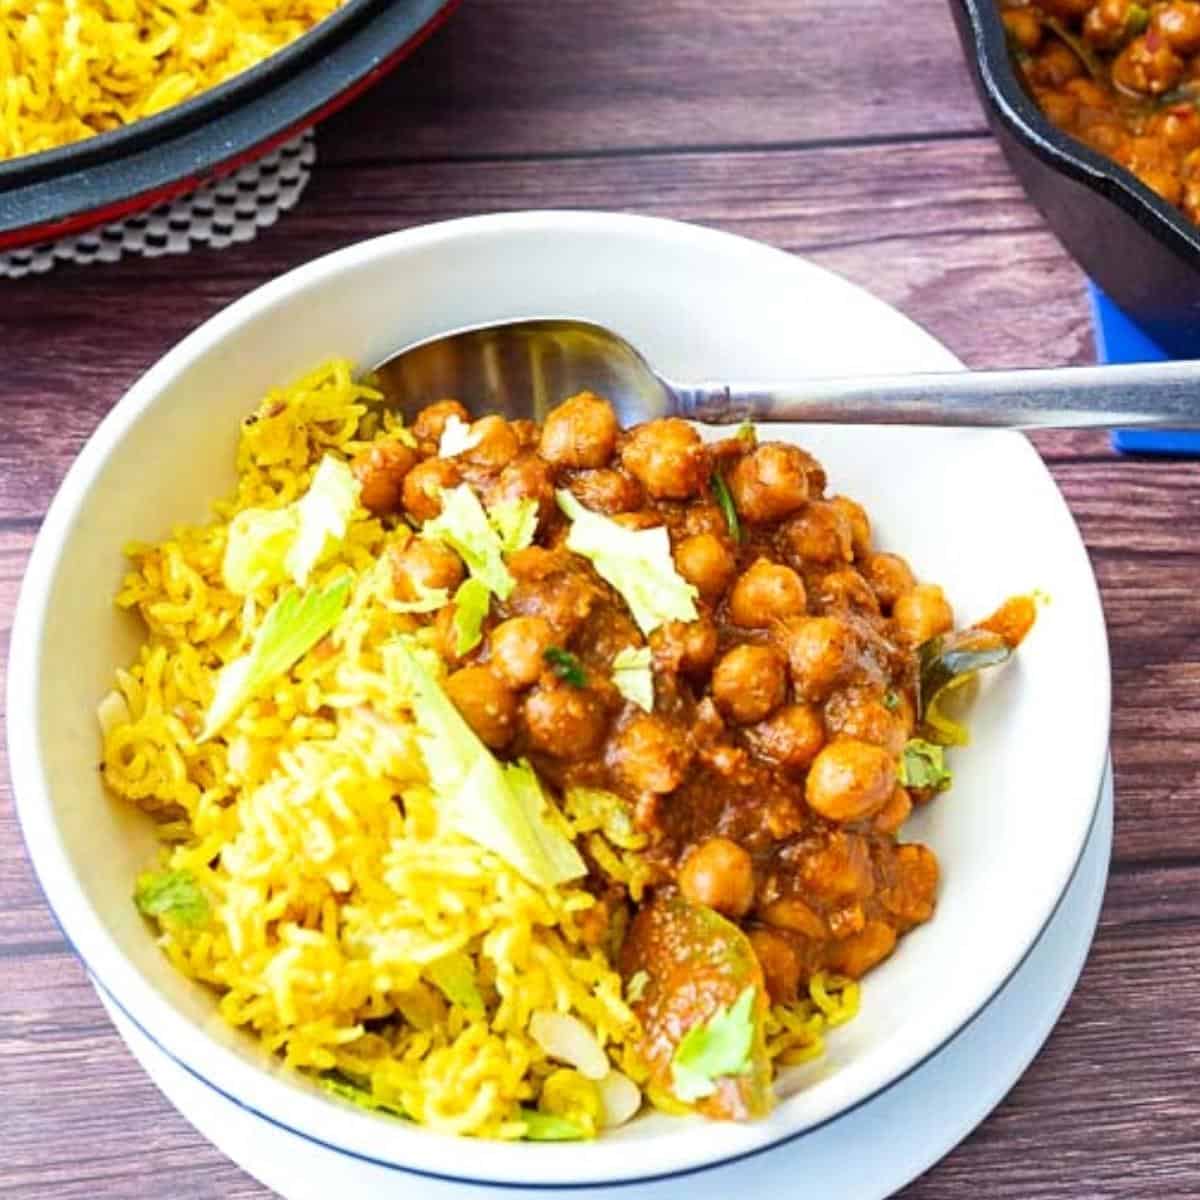 A bowl with turmeric rice and chickpeas curry.